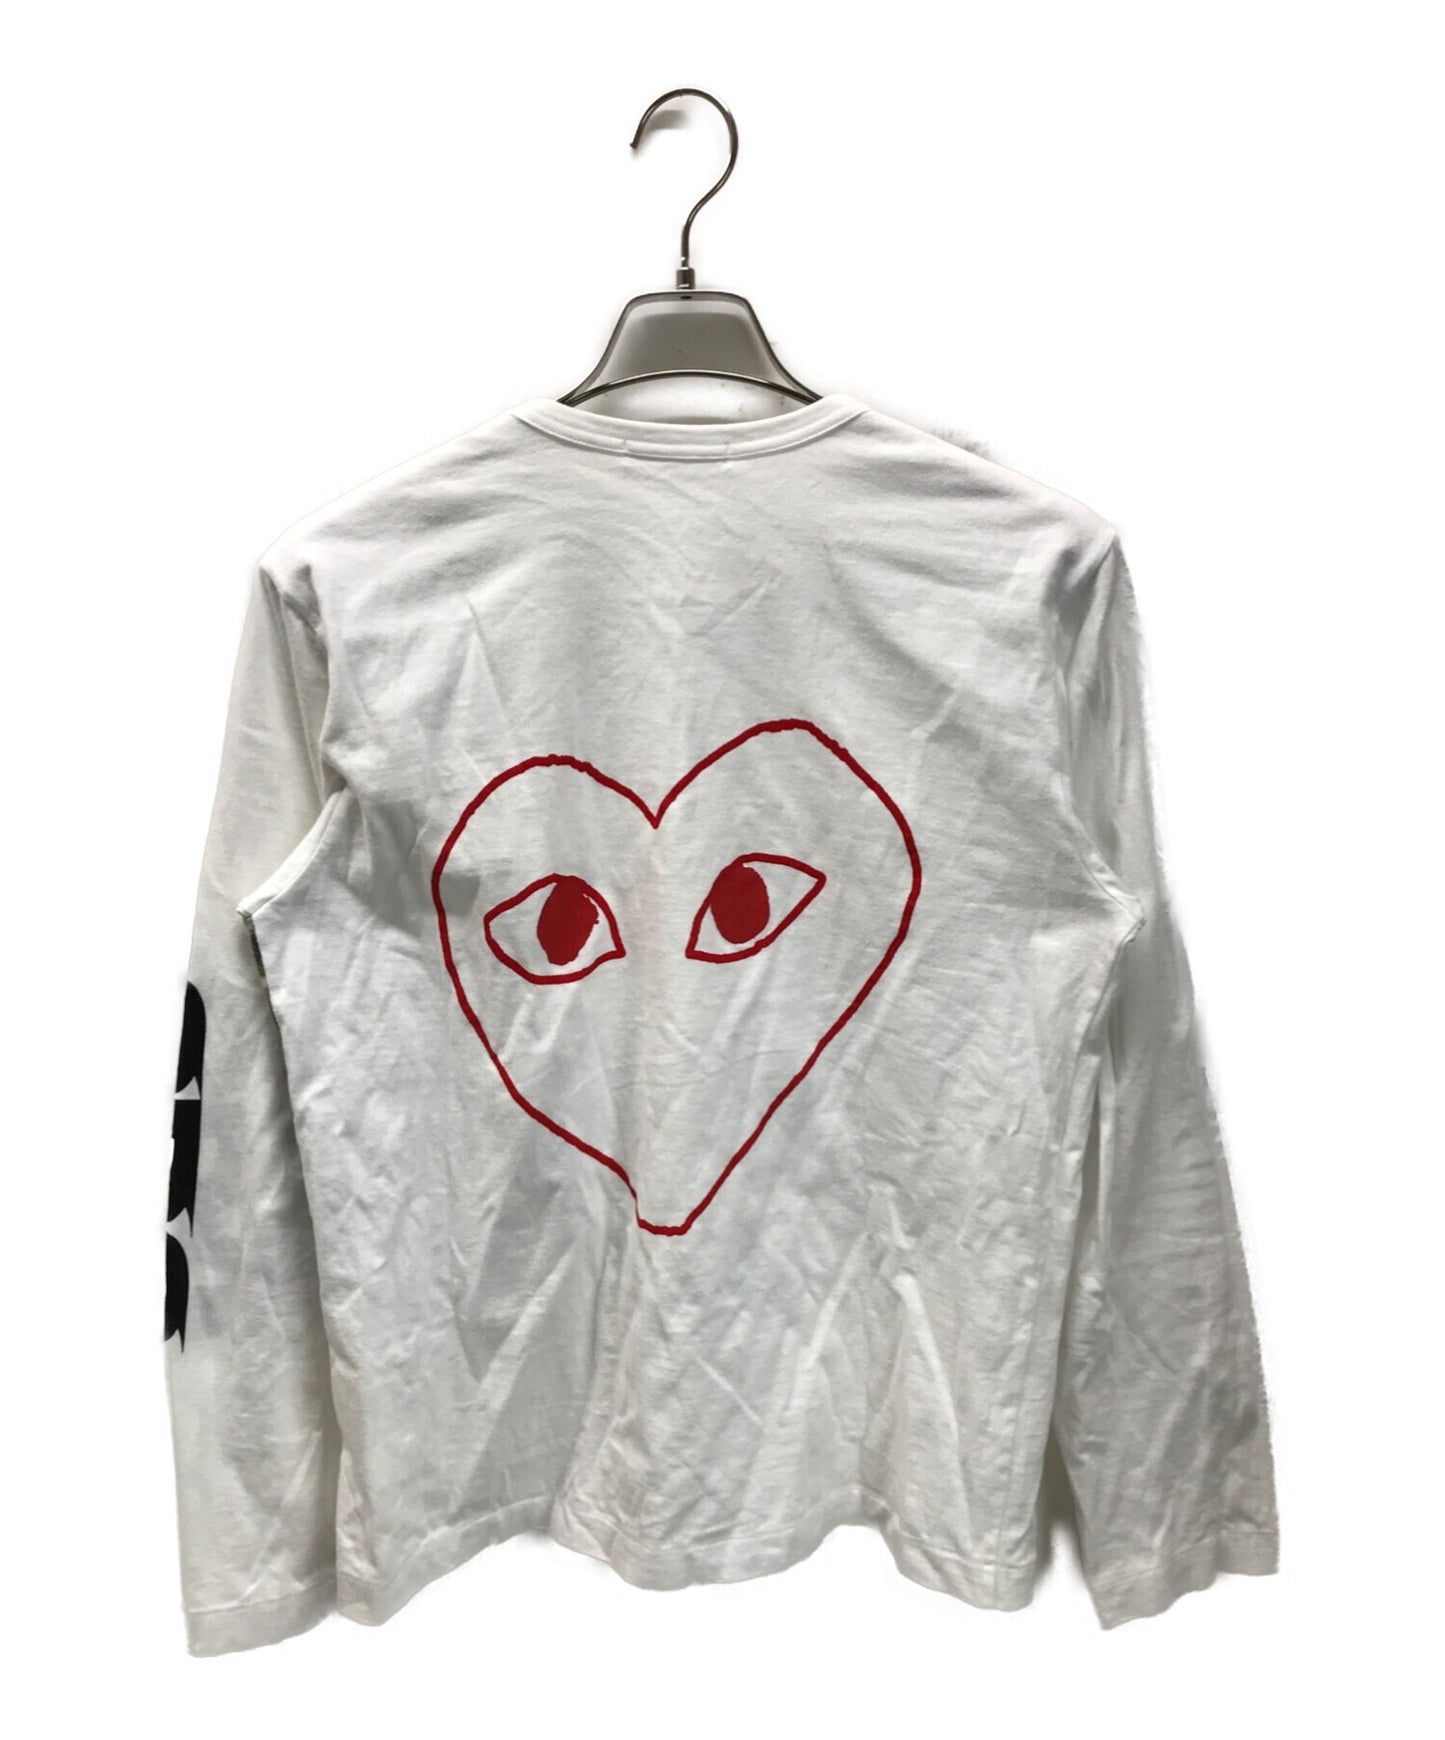 Comme des Garcons Sleeve CDG Back Heart Print Cut and Sewn OQ-T008